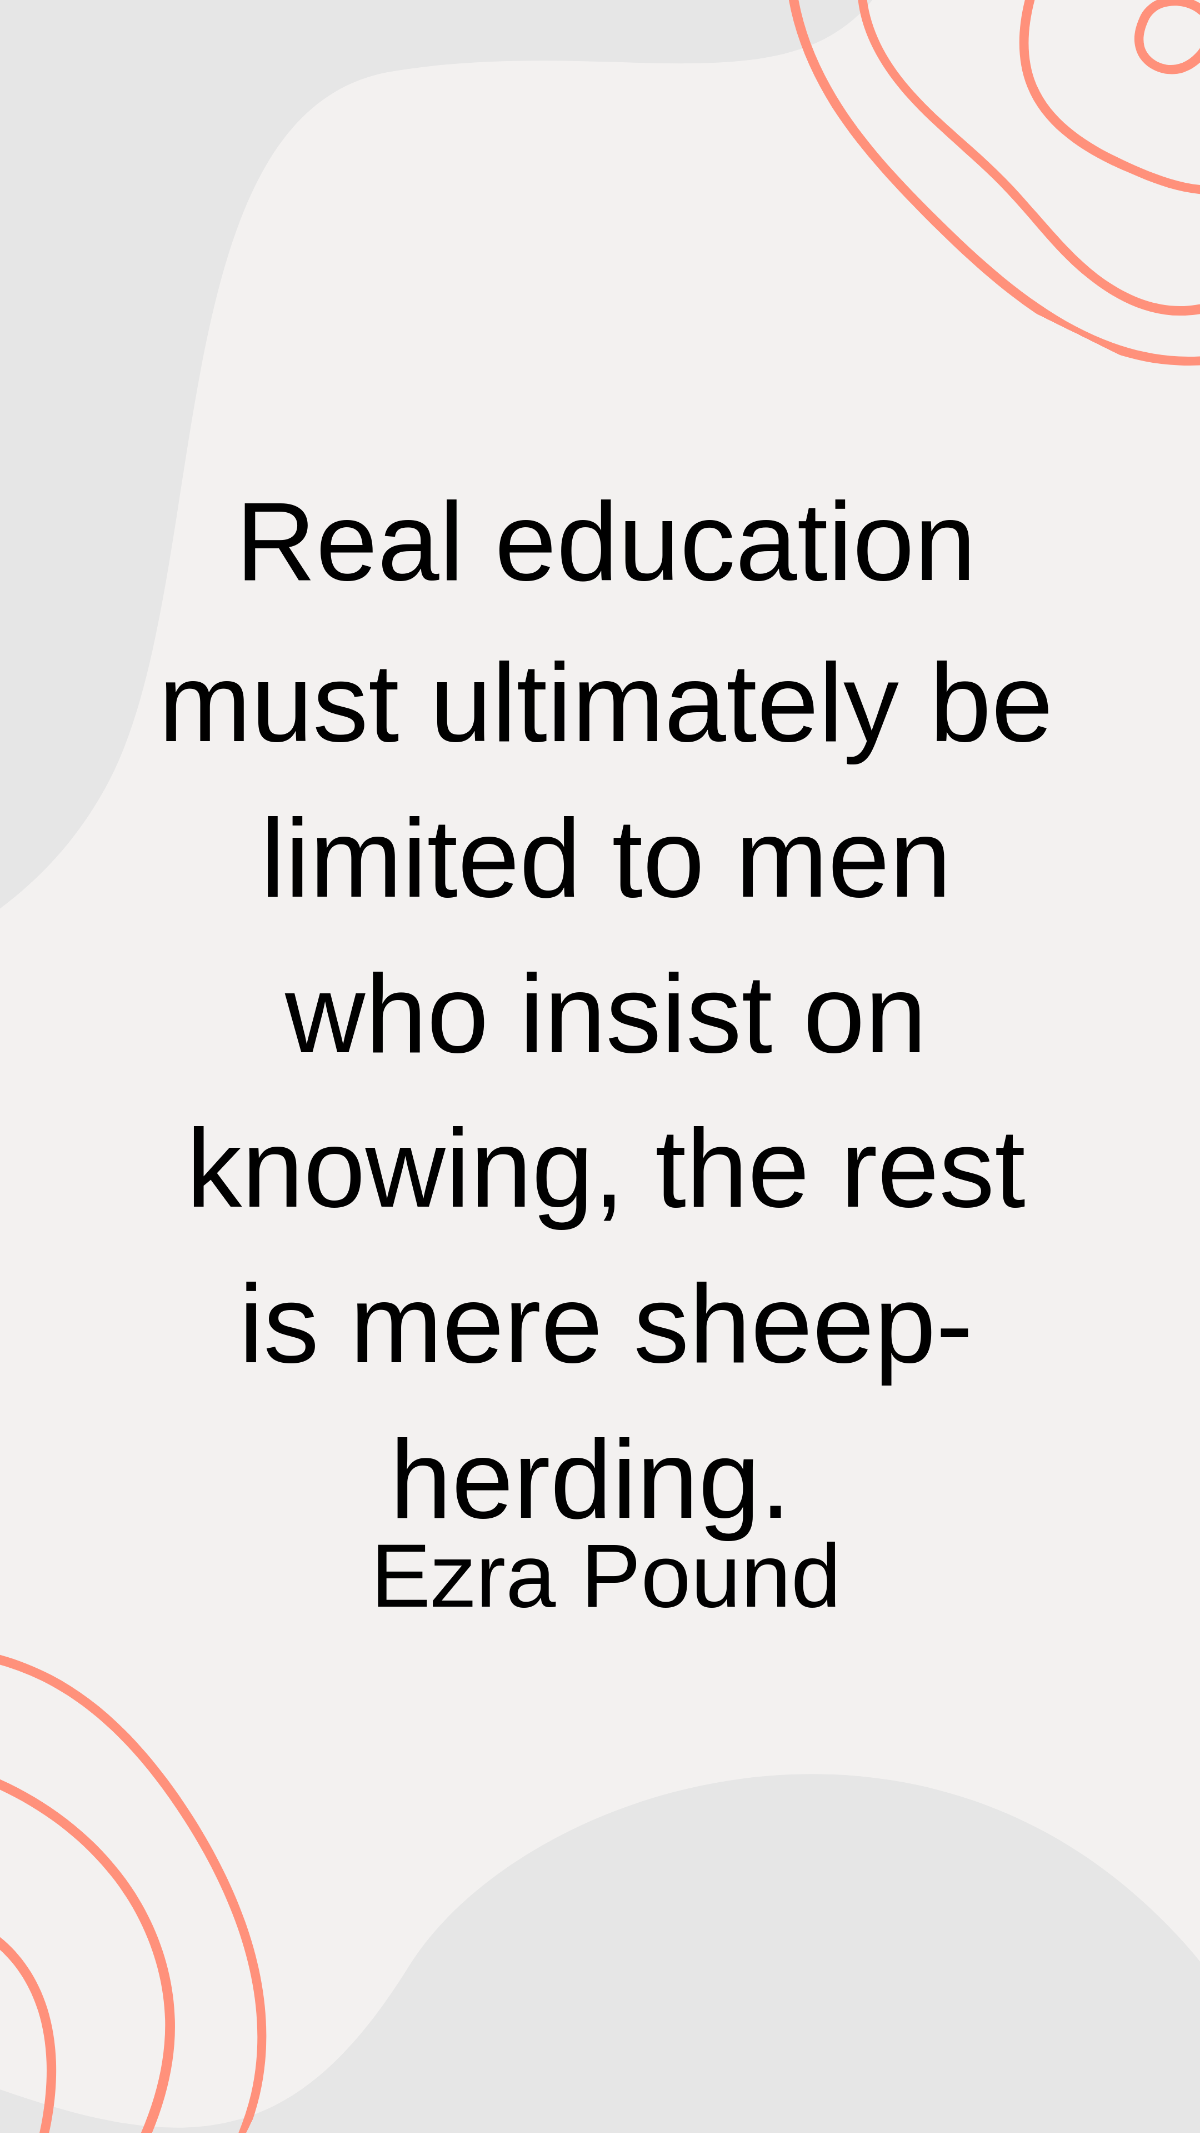 Ezra Pound - Real education must ultimately be limited to men who insist on knowing, the rest is mere sheep-herding. Template